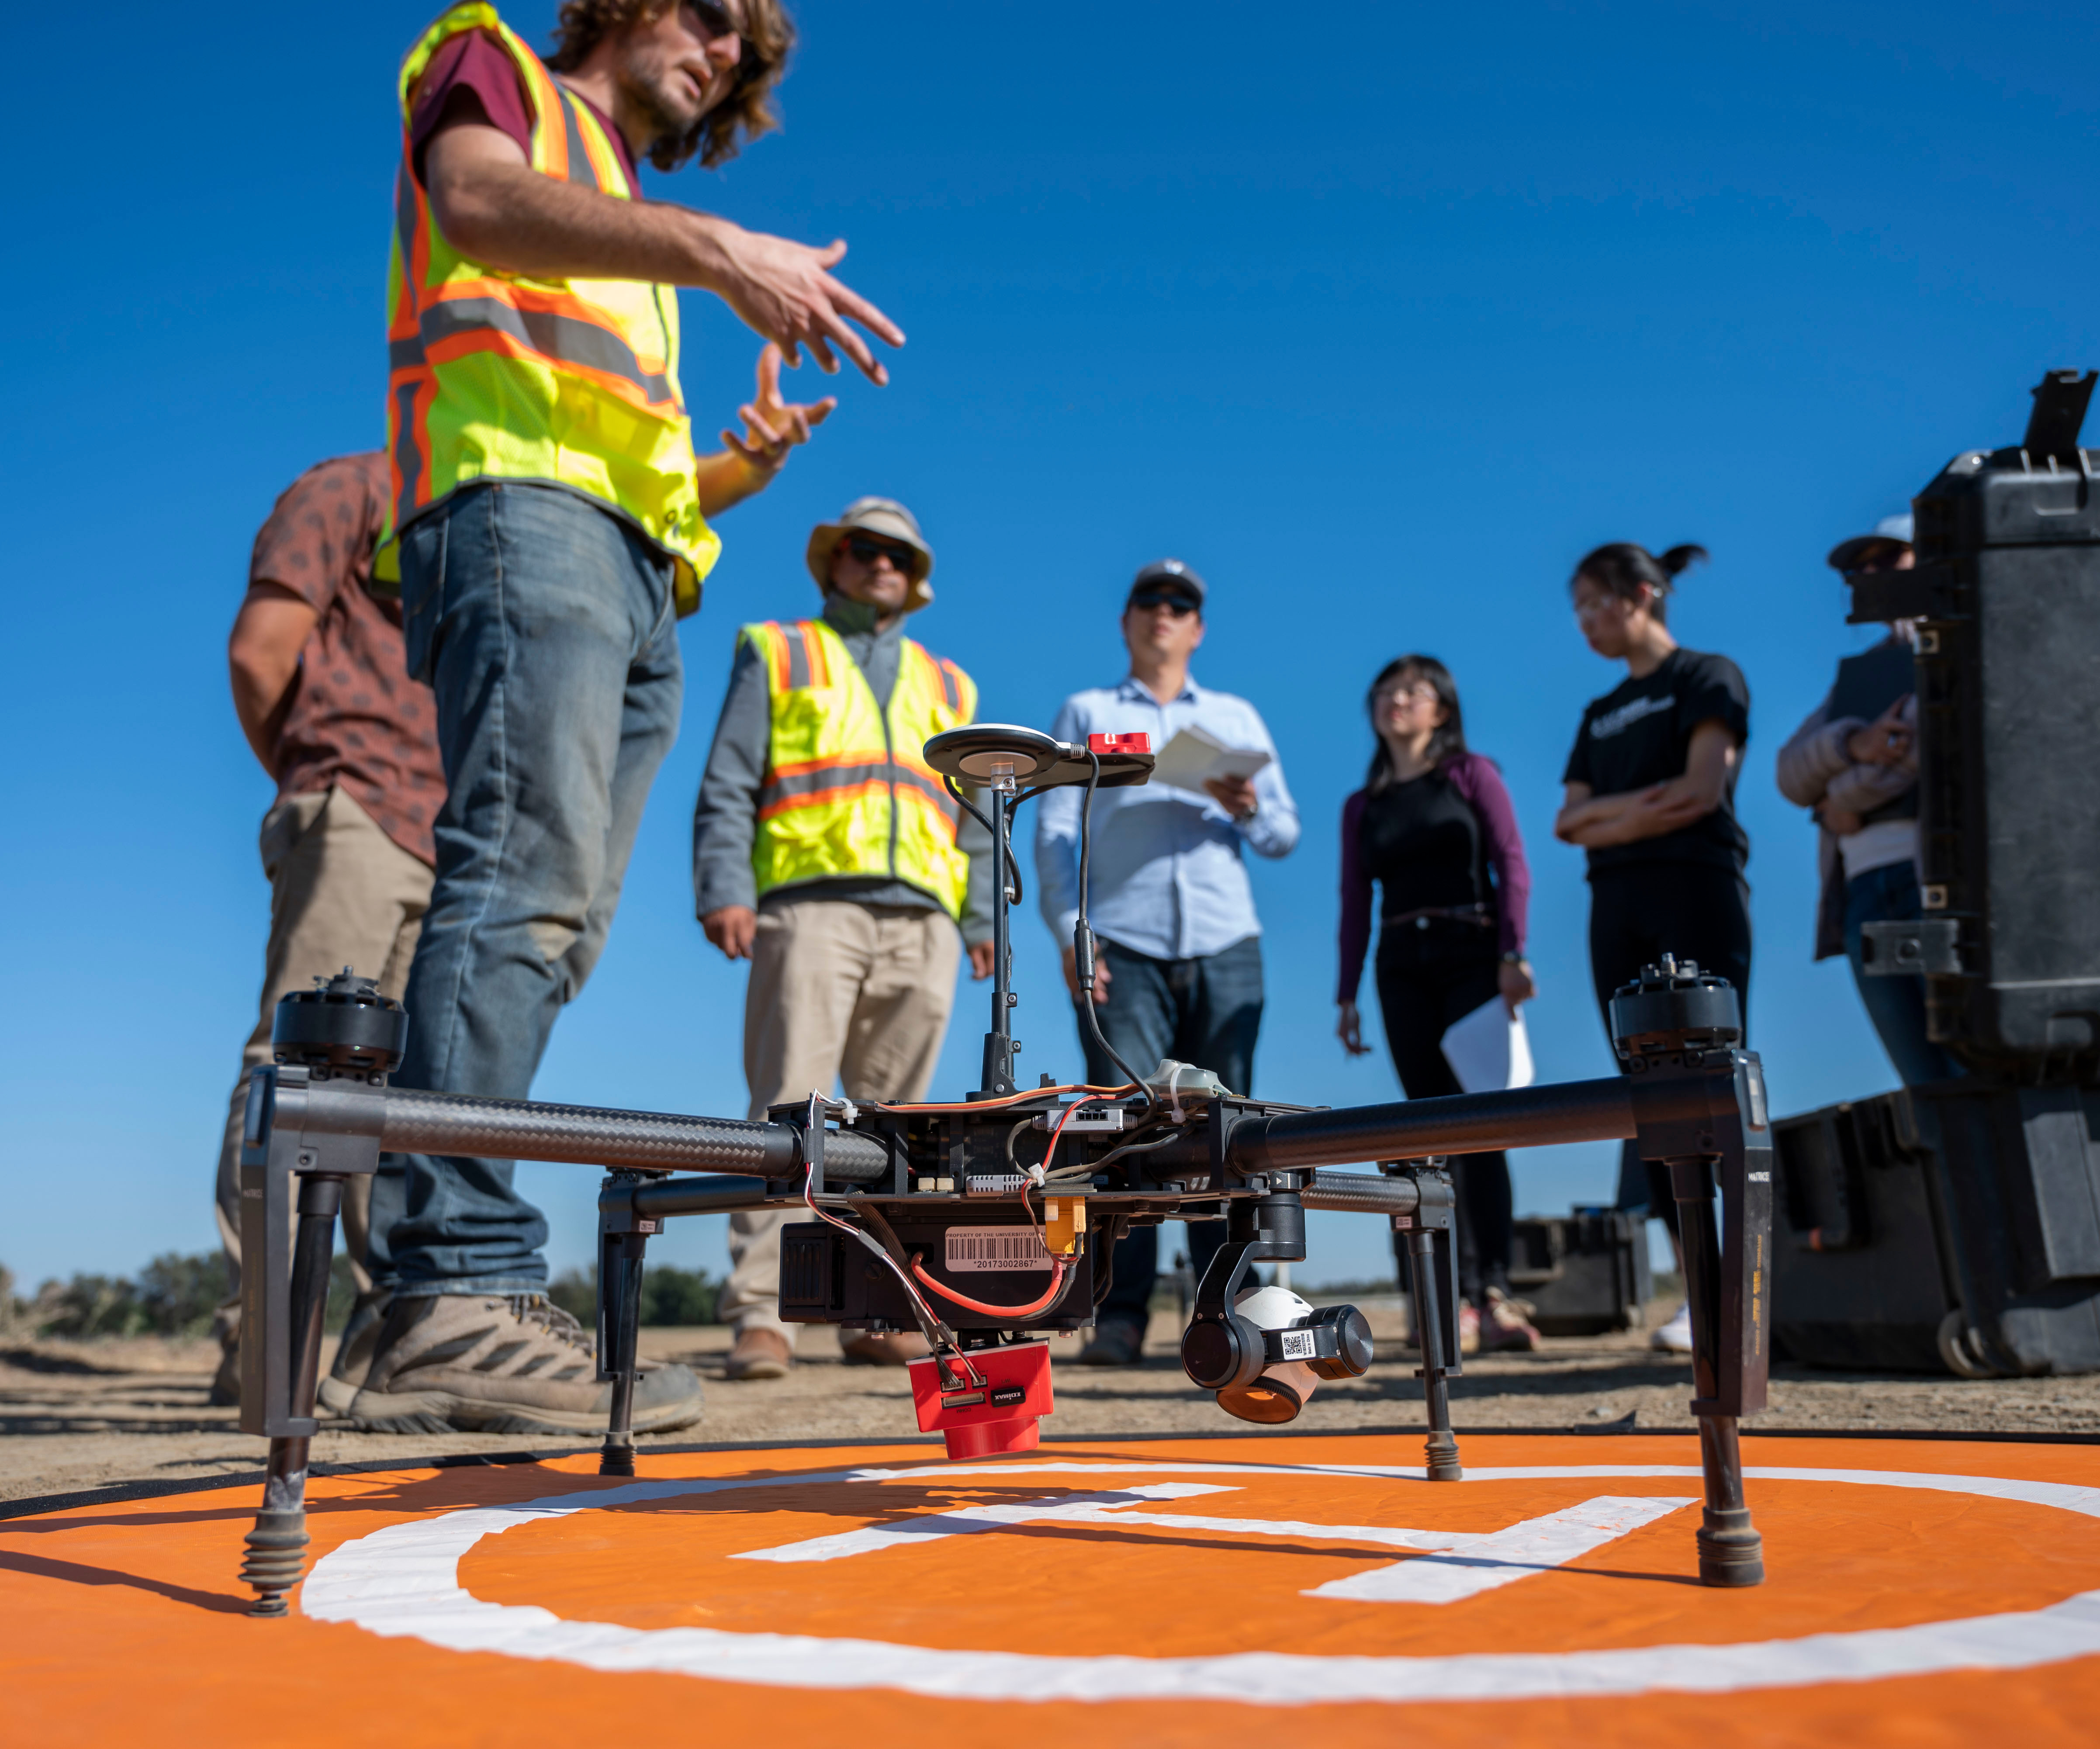 The college offered a new class—Introduction to Drone Flying. Students learn about the nuances of these unmanned aircraft systems and how to fly them safely.